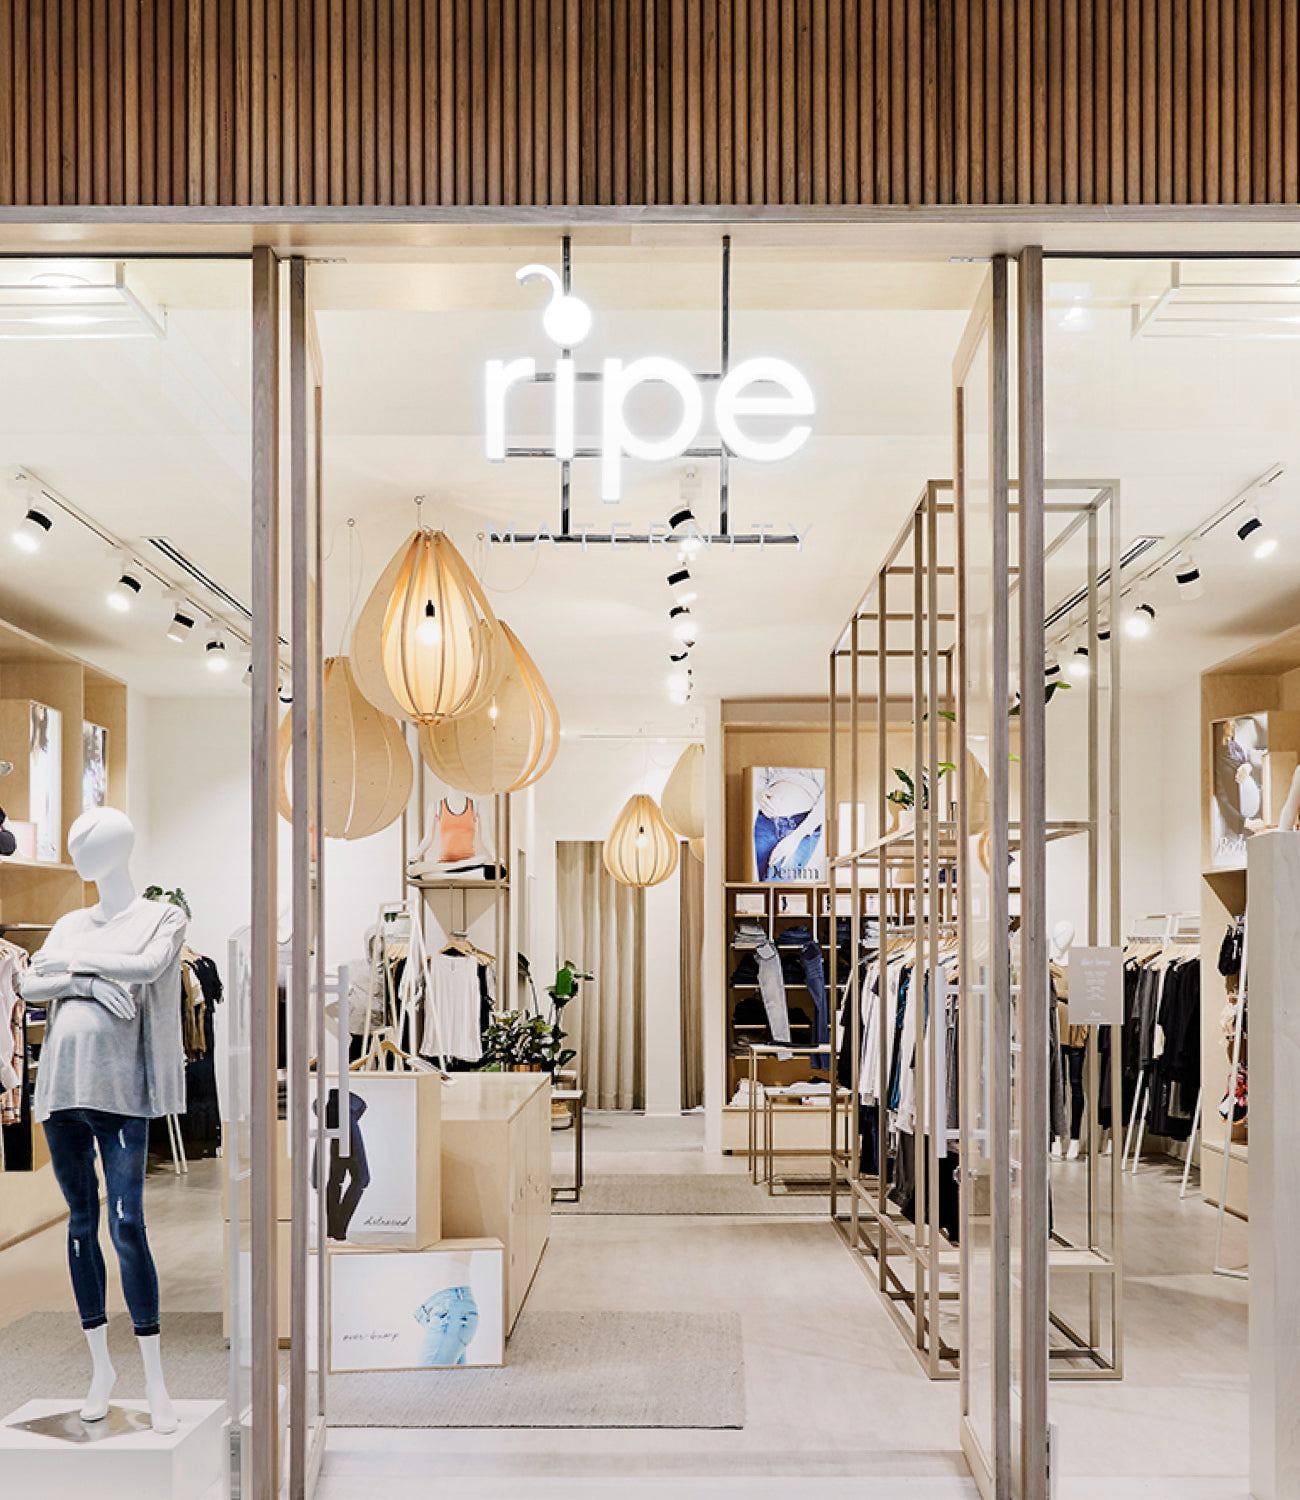 Ripe Maternity - What's your closest @ripematernity store? 🤰🏻 #store  #ripematernity